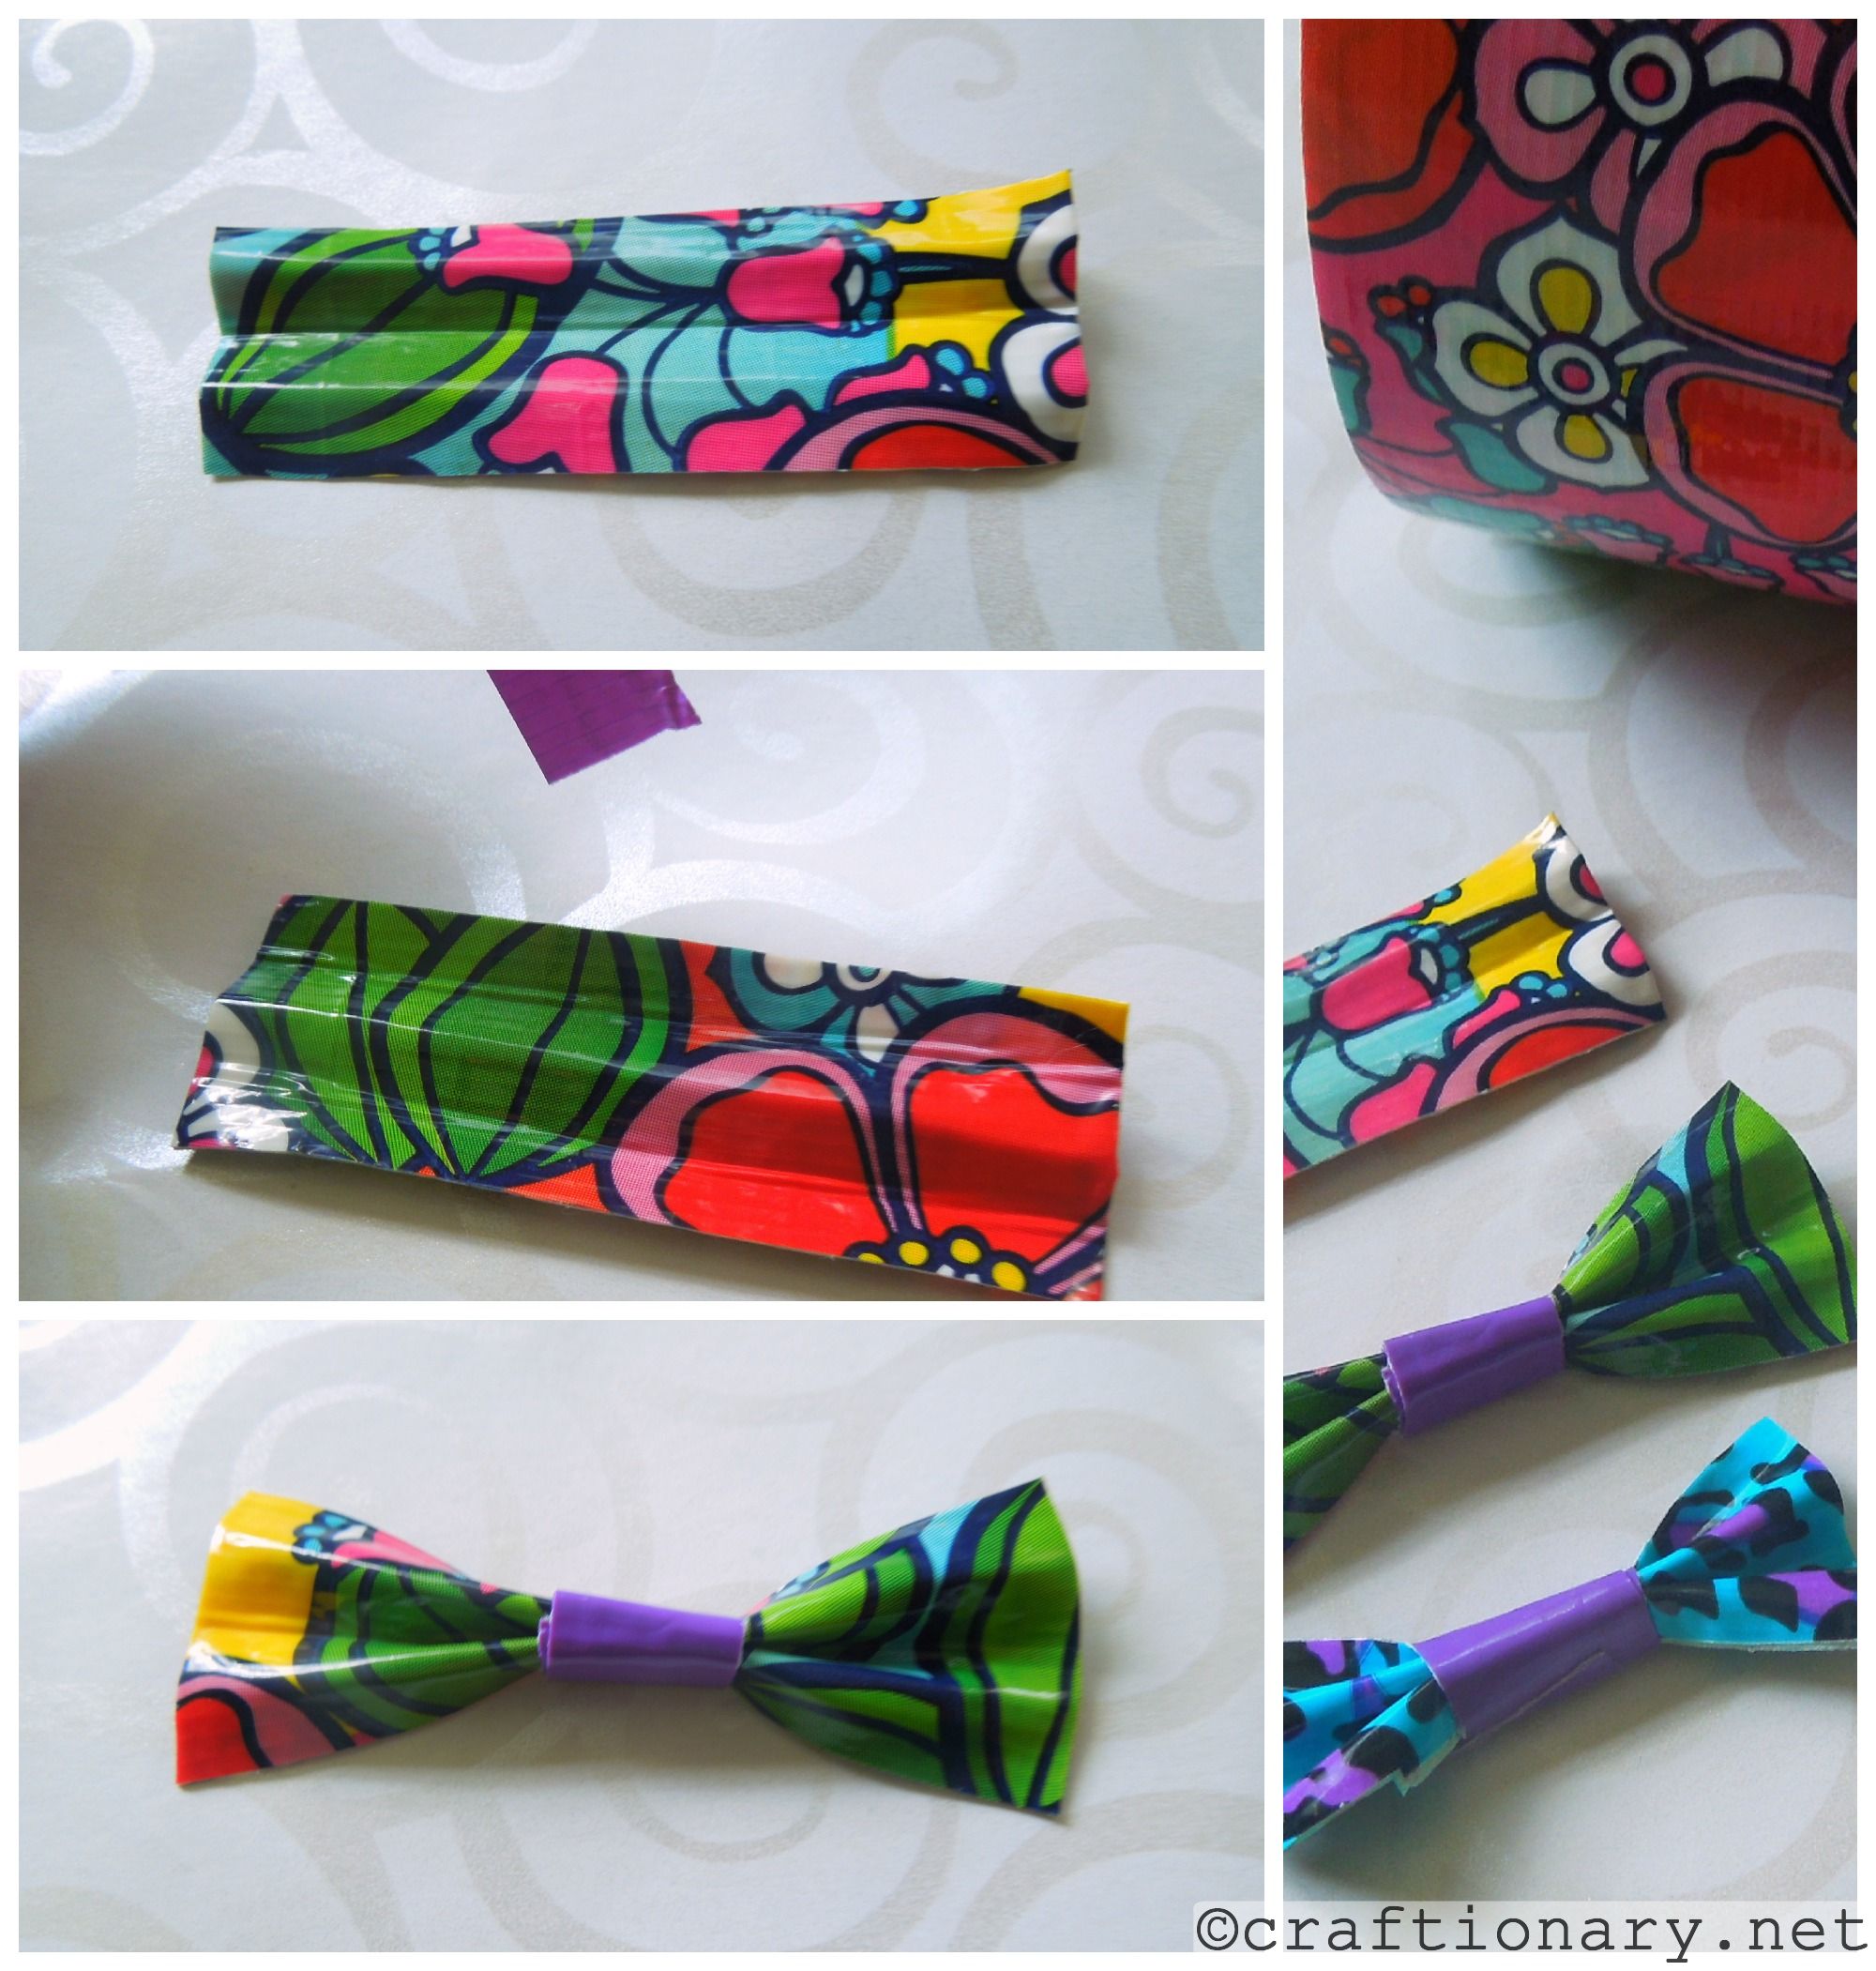 Duct tape crafts- DIY girly accessories - Craftionary